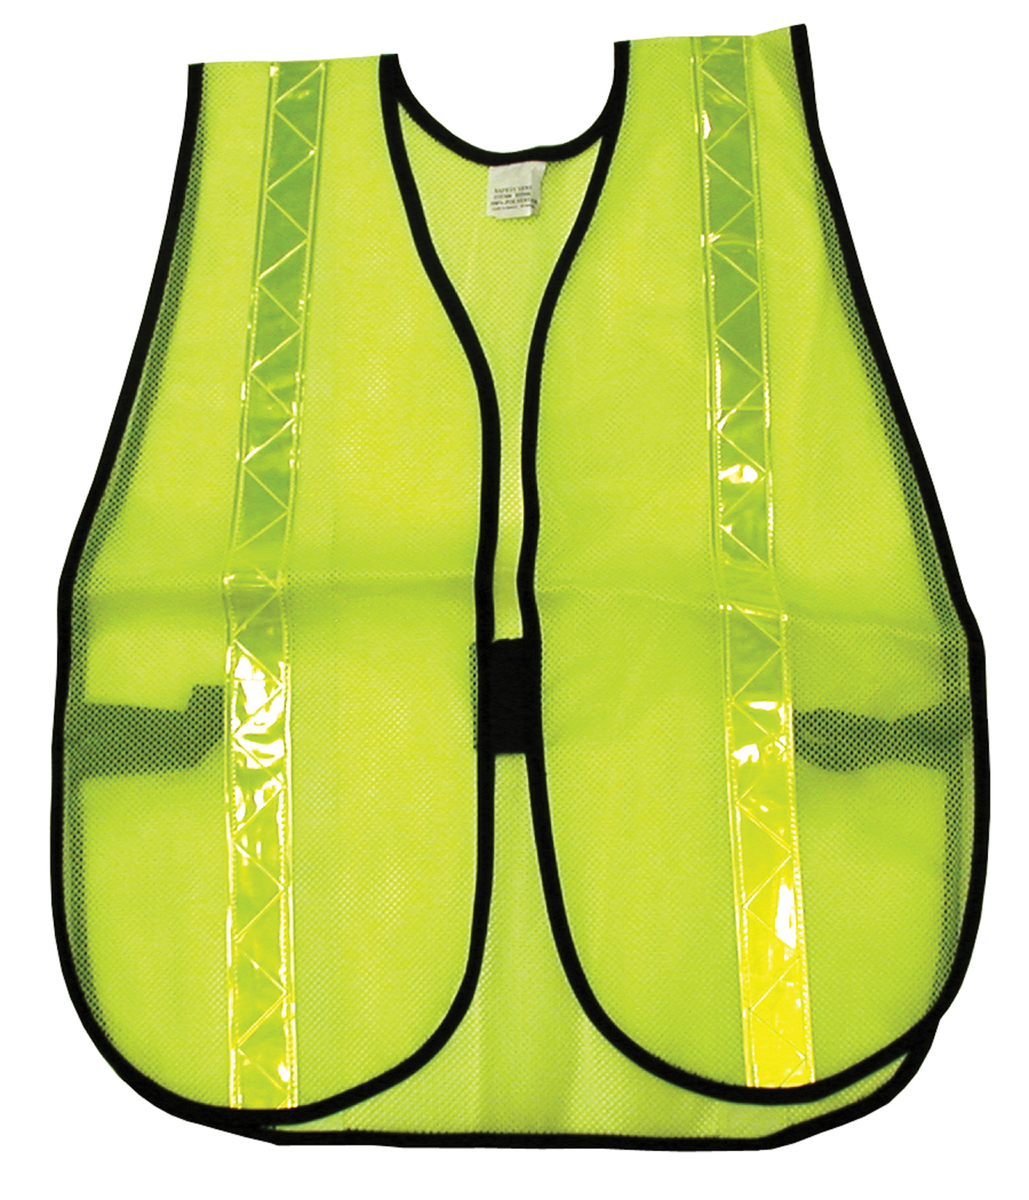 General Purpose Safety Vest, Polyester Mesh, 1 3/8" Lime Reflective Stripes, Lime